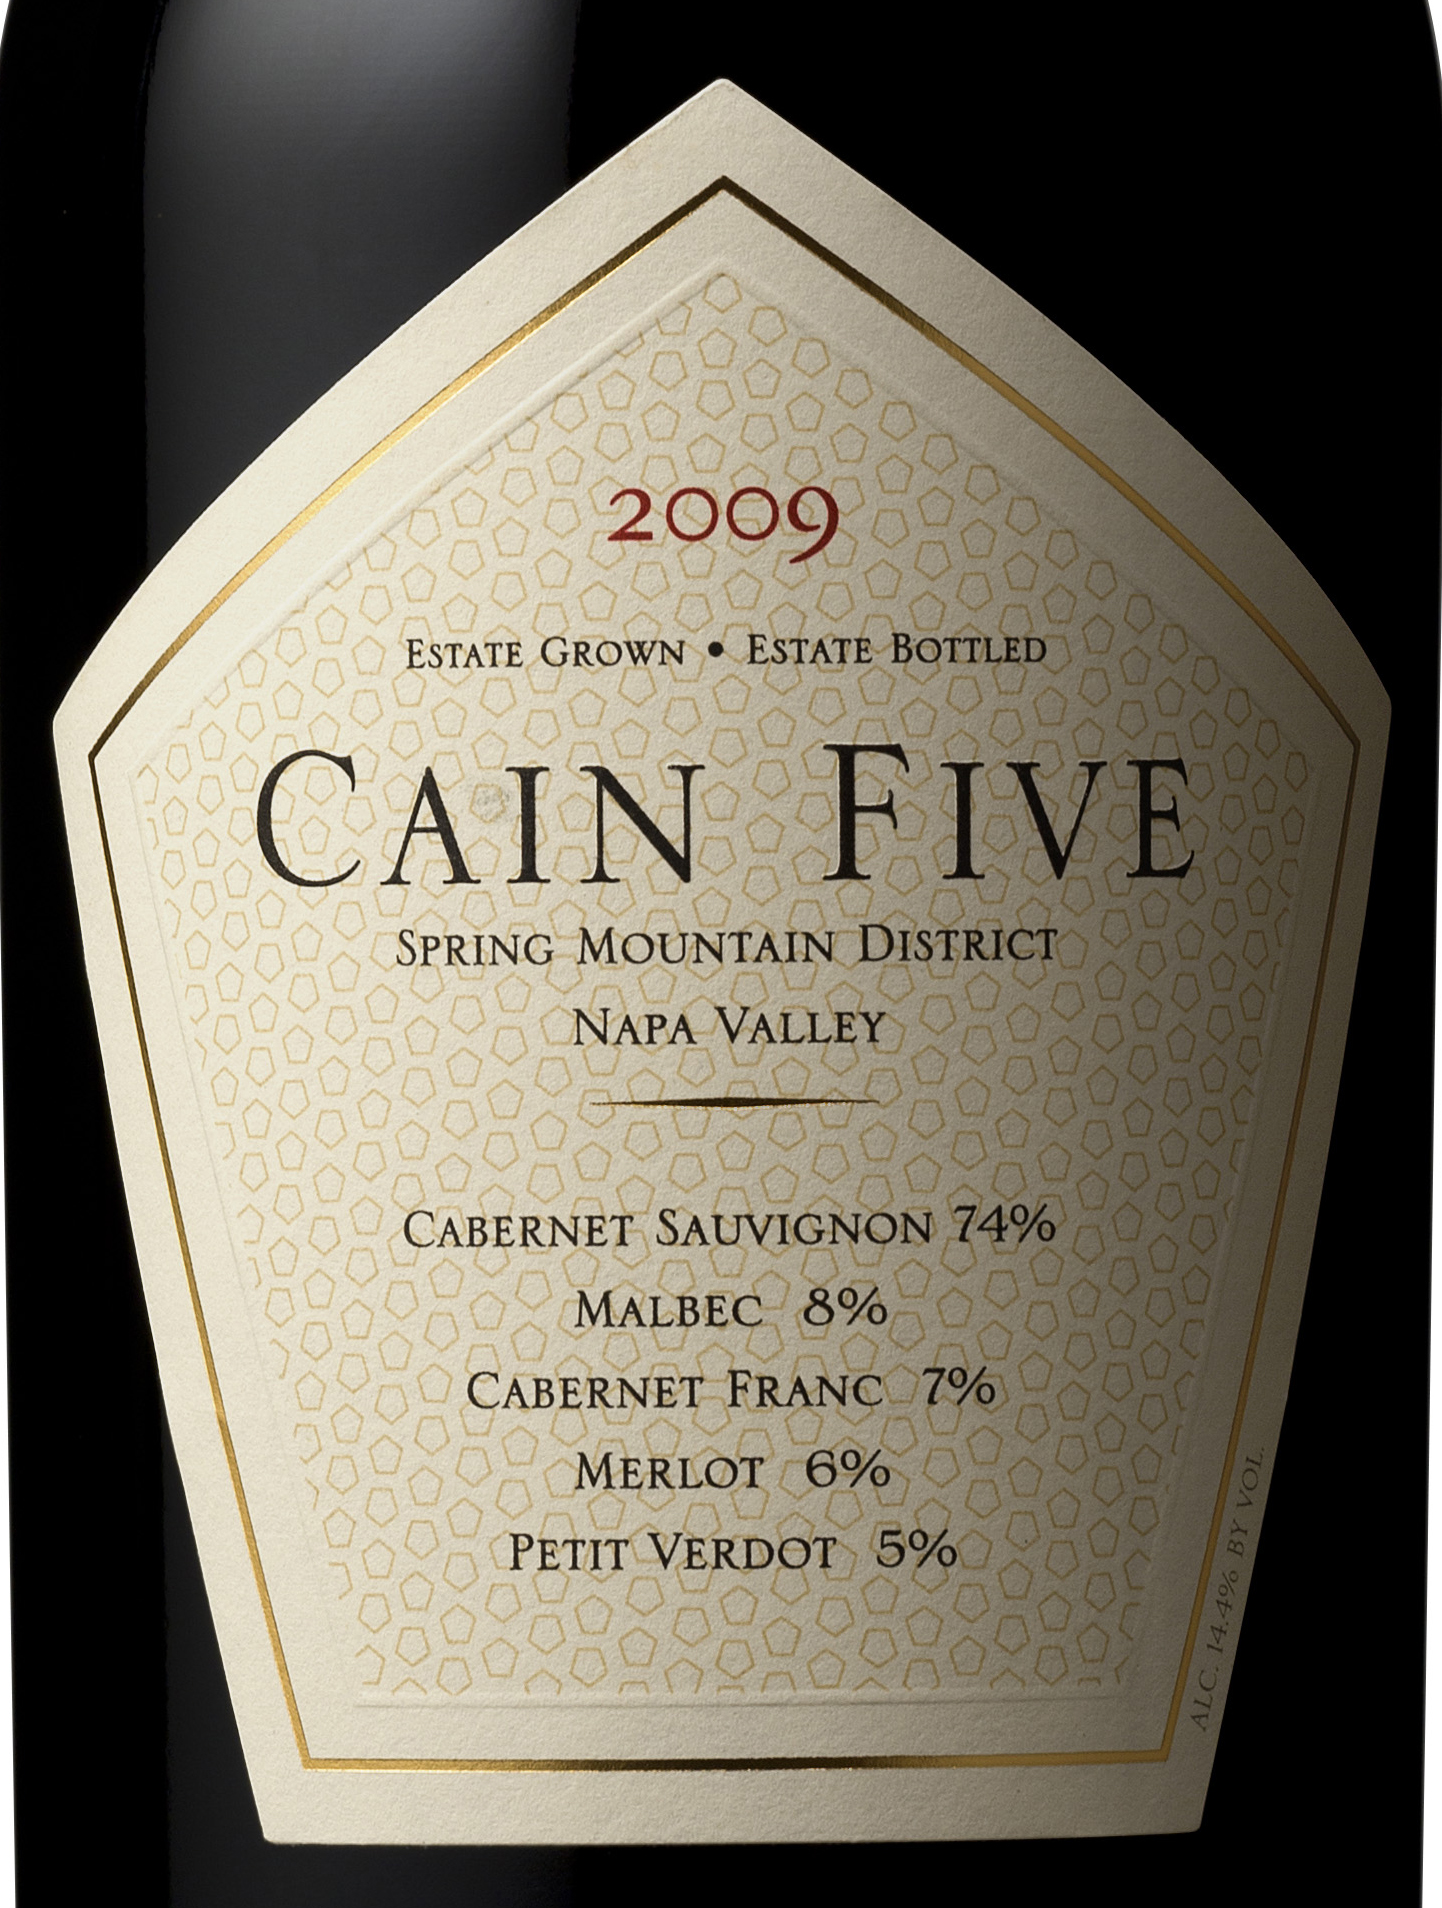 2009 Cain Five featured in Departures